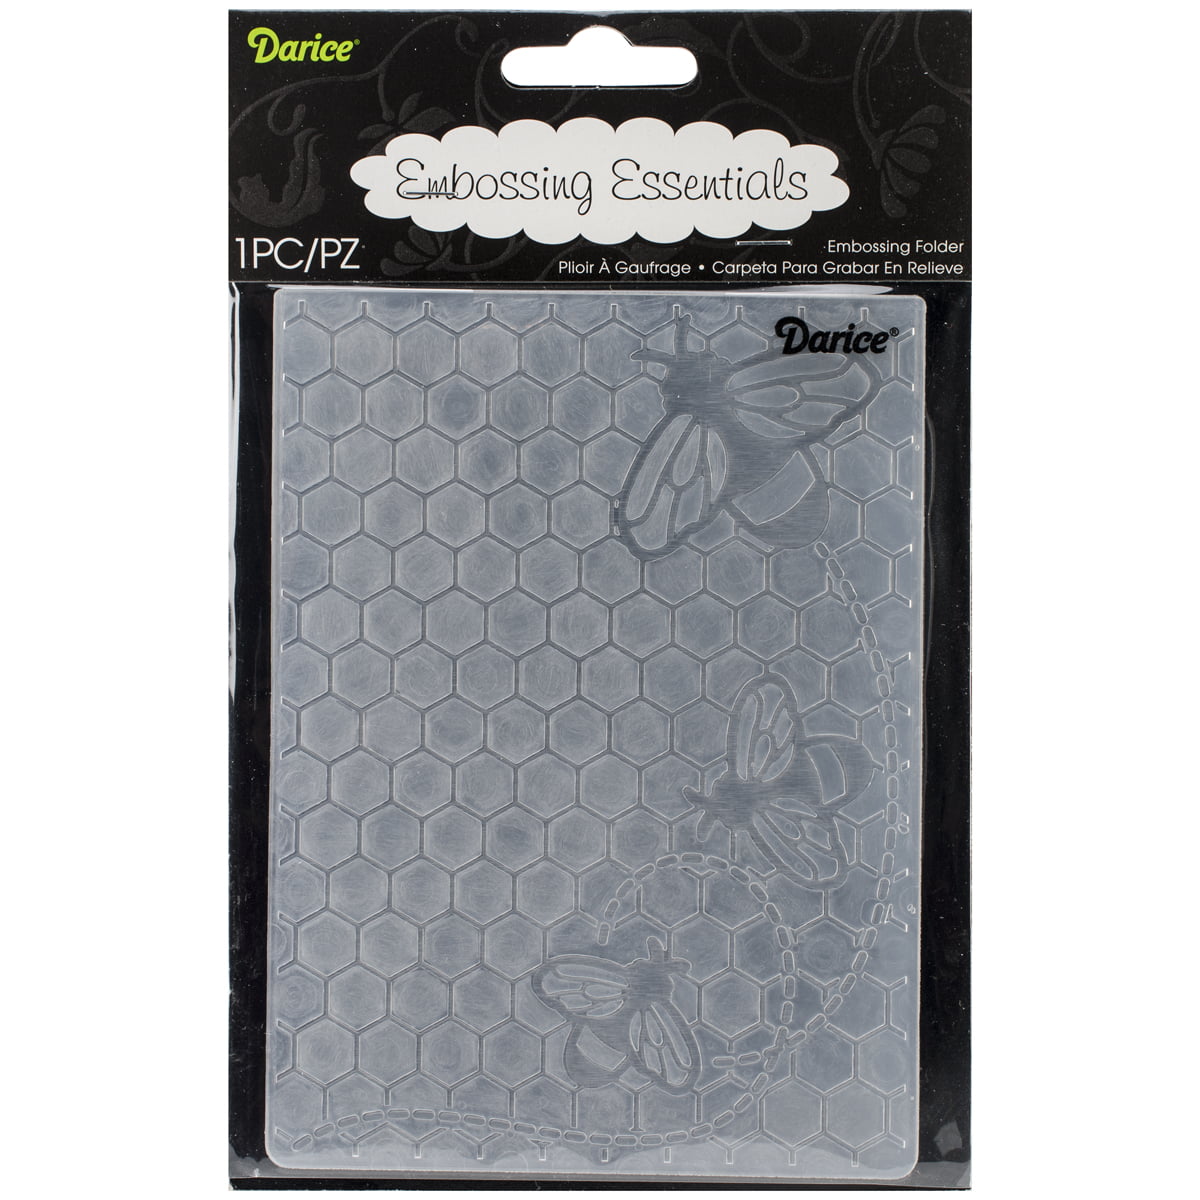 4.25 by 5.75-Inch Bees Buzzing Darice Embossing Folder